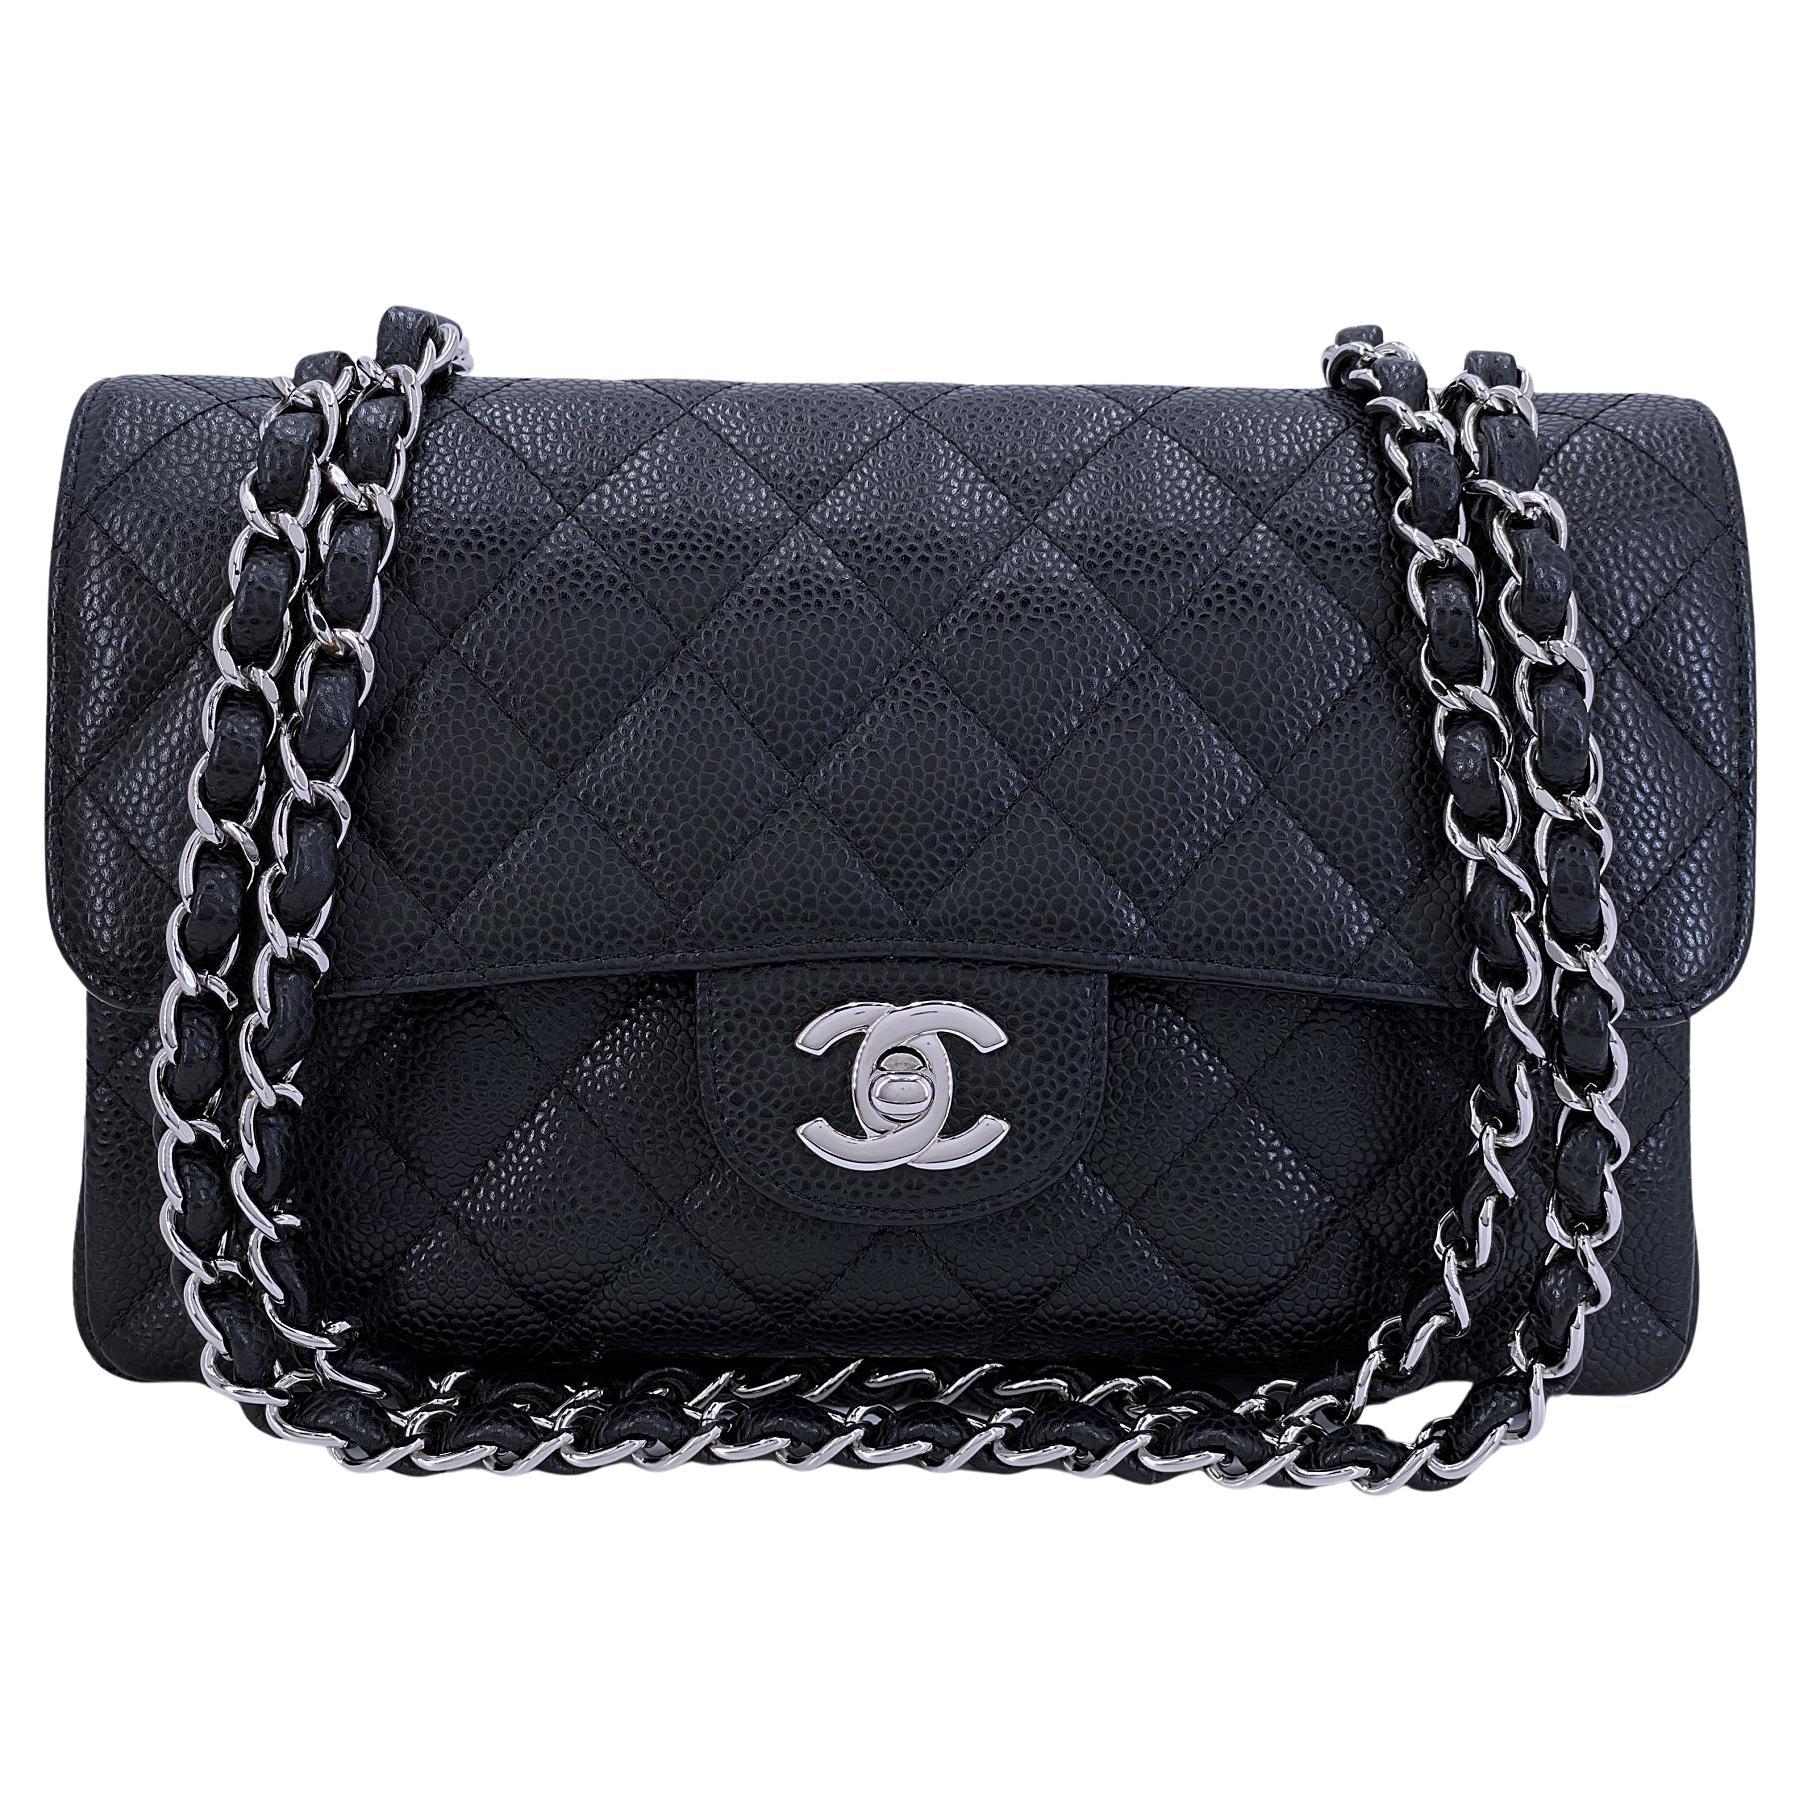 Chanel Black Caviar Small Classic Double Flap Bag SHW 67981 For Sale